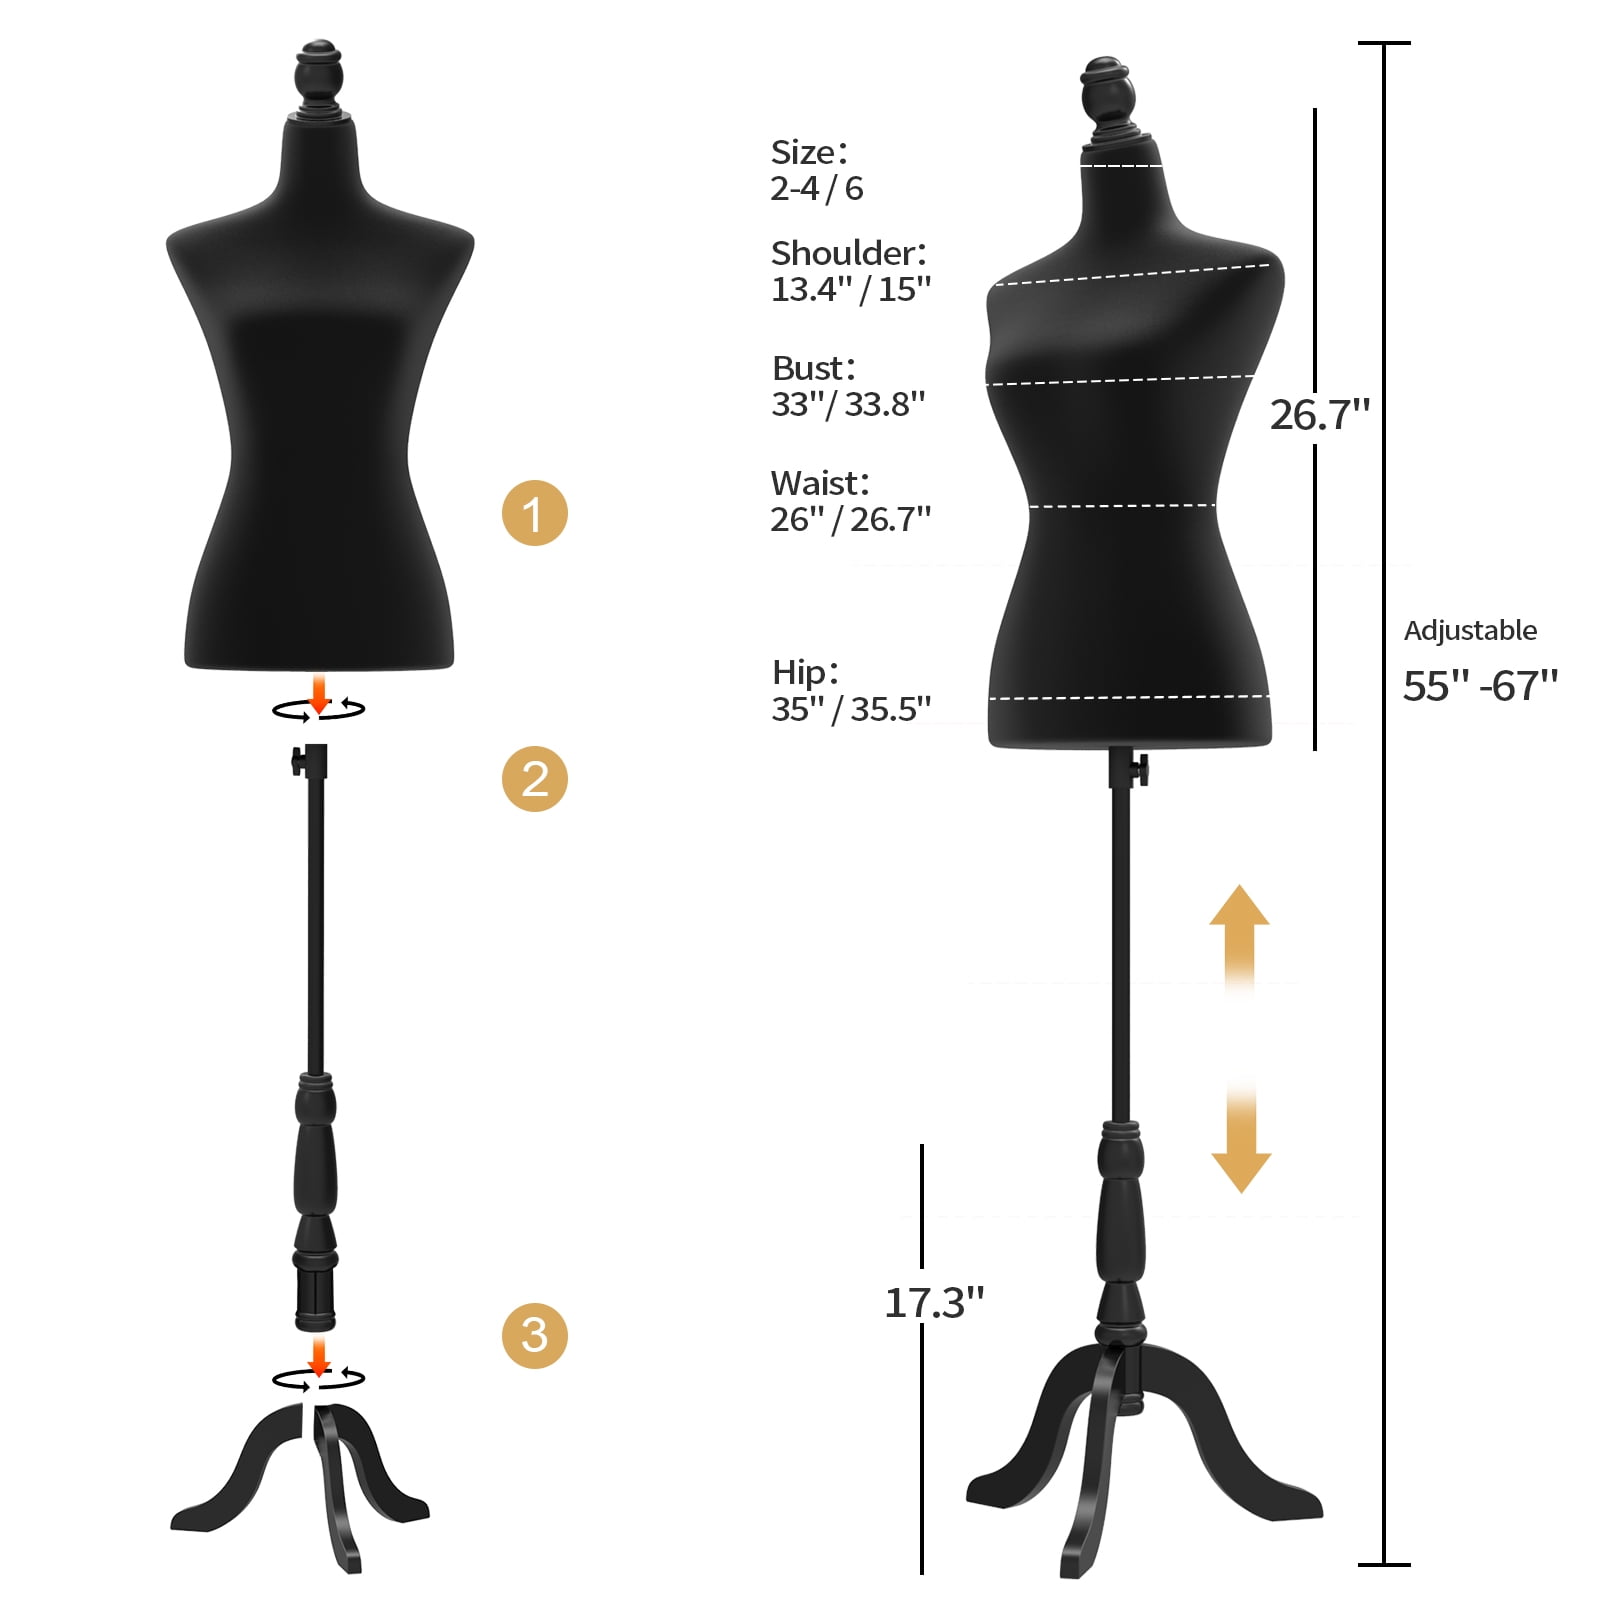 Winado White Female Pinnable Mannequin Body Torso with Tripod Base Stand  018512680610 - The Home Depot